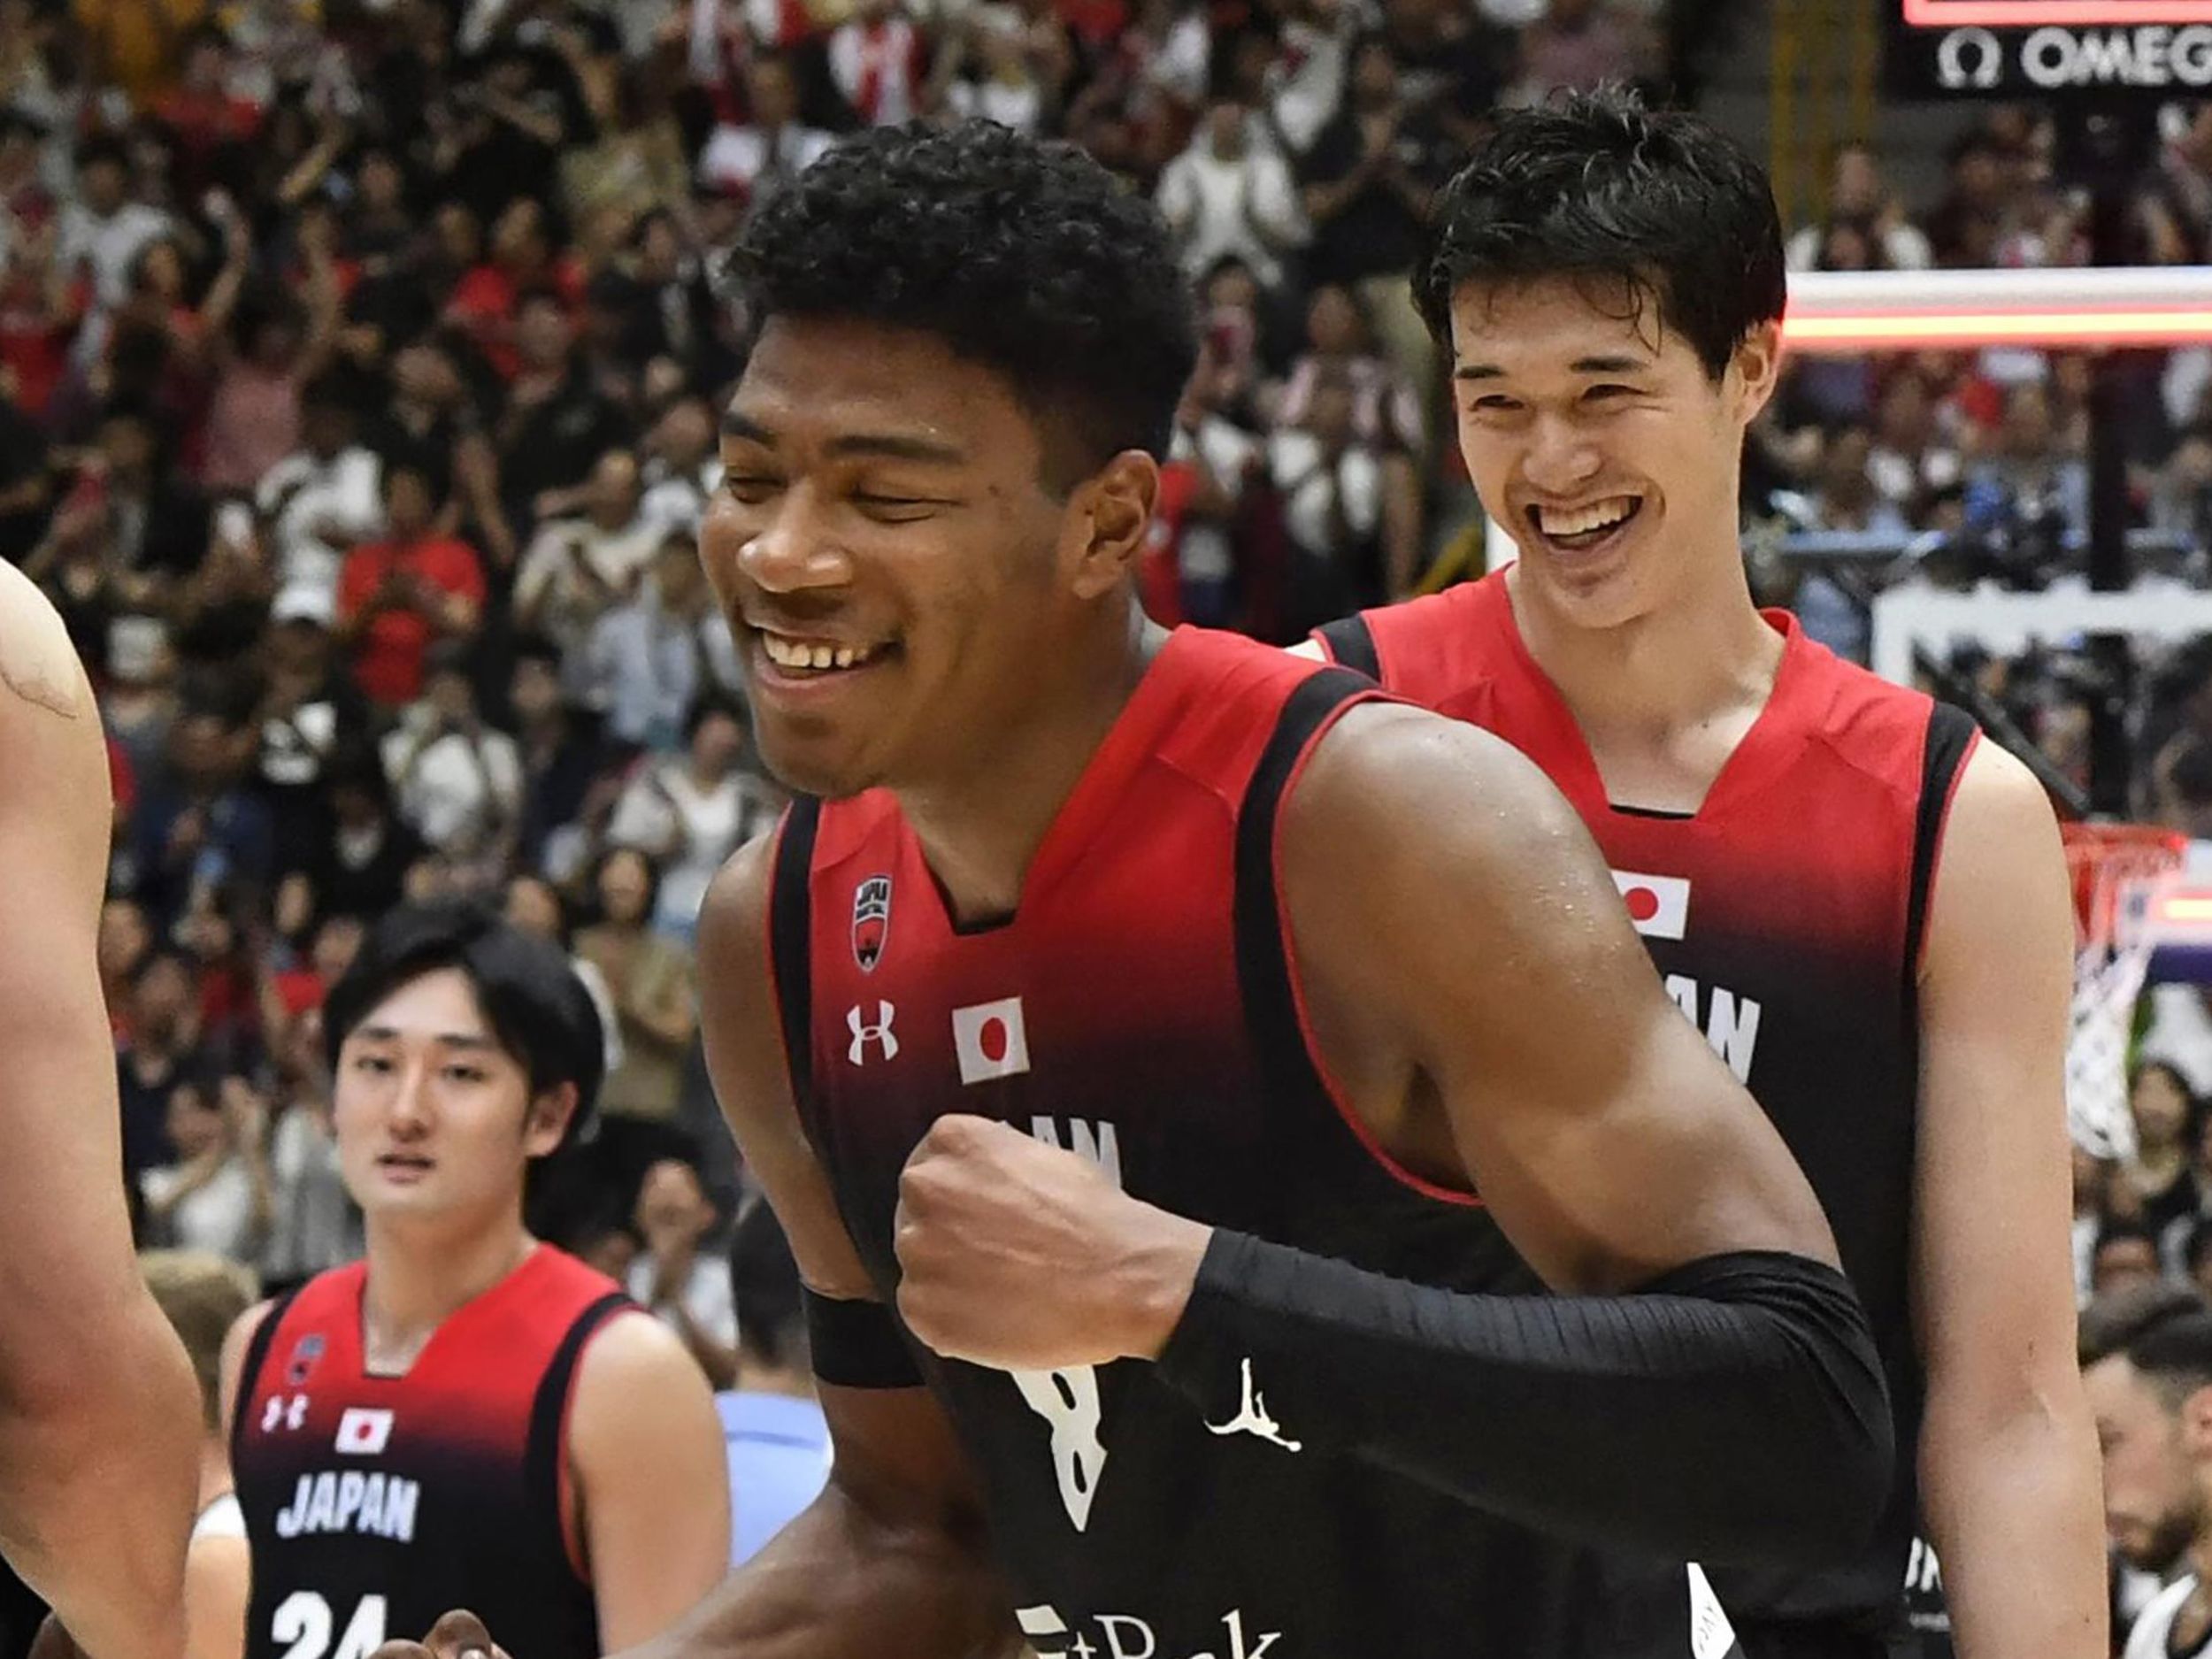 From FIBA Asia Cup to the next big stage, Yudai Baba is ready to